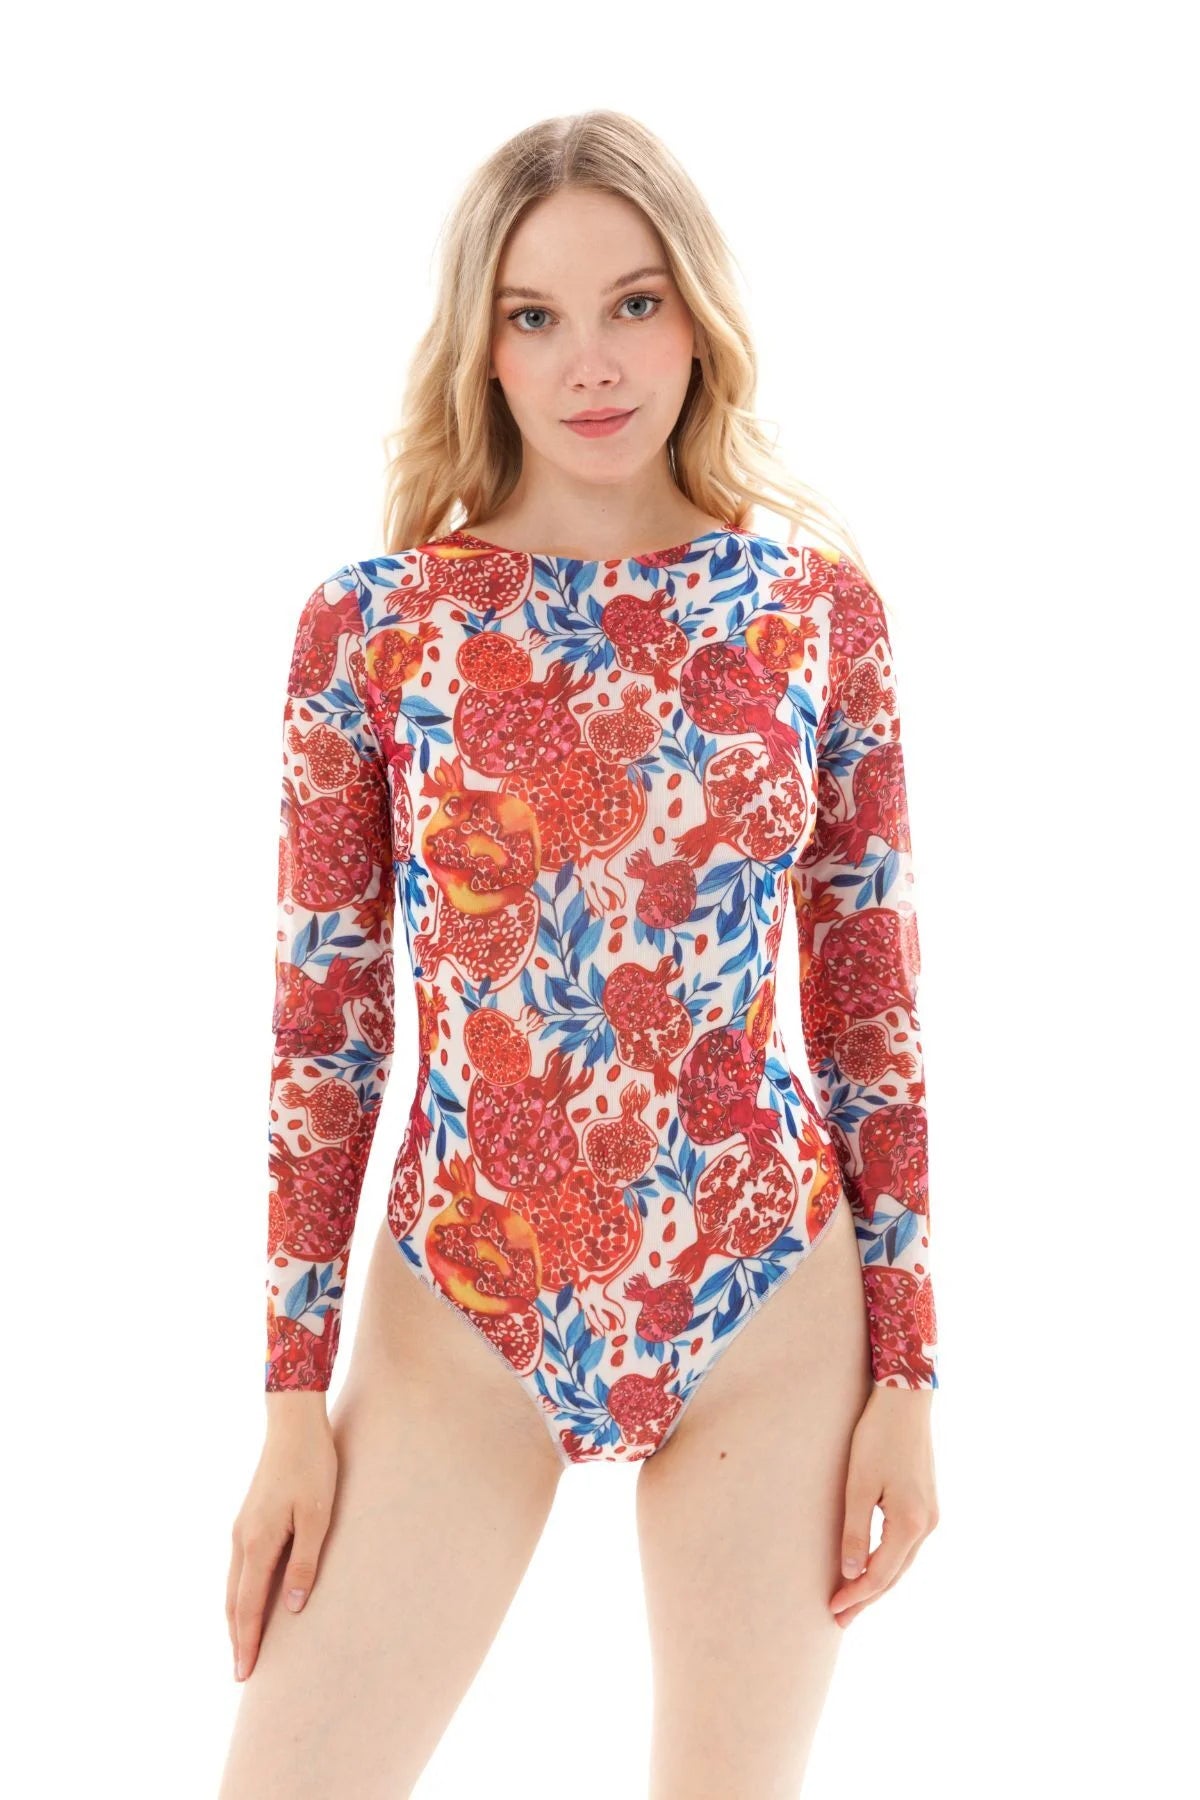 Pomegranate Red One-Piece Swimsuit